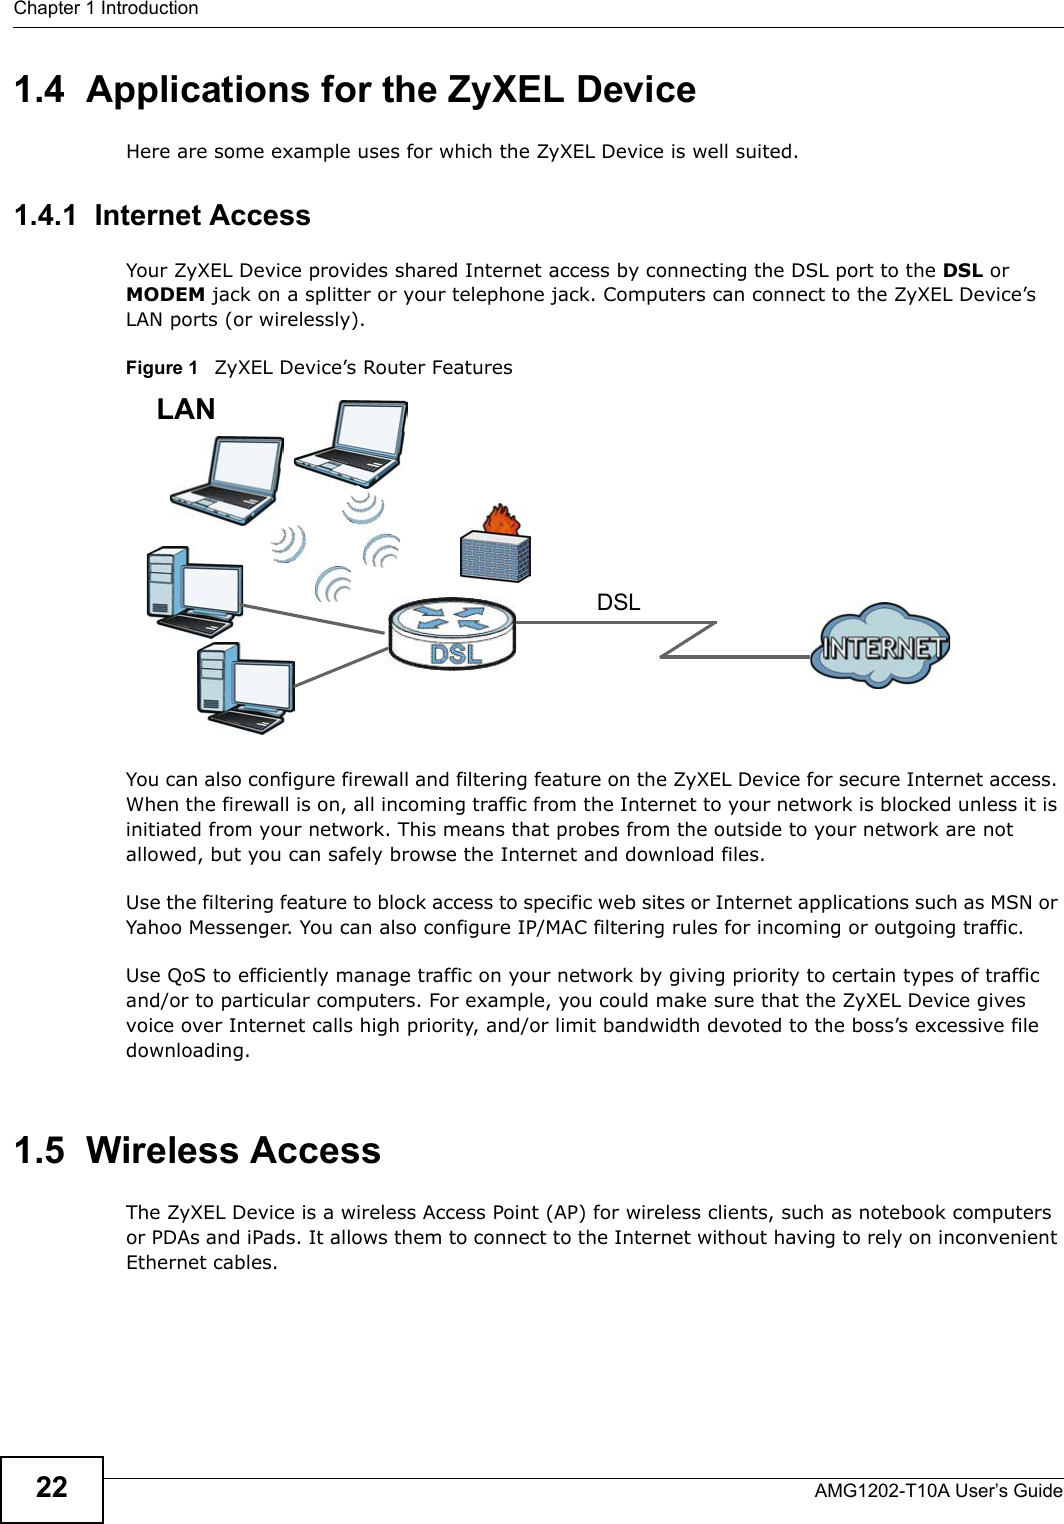 Chapter 1 IntroductionAMG1202-T10A User’s Guide221.4  Applications for the ZyXEL DeviceHere are some example uses for which the ZyXEL Device is well suited.1.4.1  Internet AccessYour ZyXEL Device provides shared Internet access by connecting the DSL port to the DSL or MODEM jack on a splitter or your telephone jack. Computers can connect to the ZyXEL Device’s LAN ports (or wirelessly).Figure 1   ZyXEL Device’s Router FeaturesYou can also configure firewall and filtering feature on the ZyXEL Device for secure Internet access. When the firewall is on, all incoming traffic from the Internet to your network is blocked unless it is initiated from your network. This means that probes from the outside to your network are not allowed, but you can safely browse the Internet and download files.Use the filtering feature to block access to specific web sites or Internet applications such as MSN or Yahoo Messenger. You can also configure IP/MAC filtering rules for incoming or outgoing traffic.Use QoS to efficiently manage traffic on your network by giving priority to certain types of traffic and/or to particular computers. For example, you could make sure that the ZyXEL Device gives voice over Internet calls high priority, and/or limit bandwidth devoted to the boss’s excessive file downloading.1.5  Wireless AccessThe ZyXEL Device is a wireless Access Point (AP) for wireless clients, such as notebook computers or PDAs and iPads. It allows them to connect to the Internet without having to rely on inconvenient Ethernet cables.DSLLAN